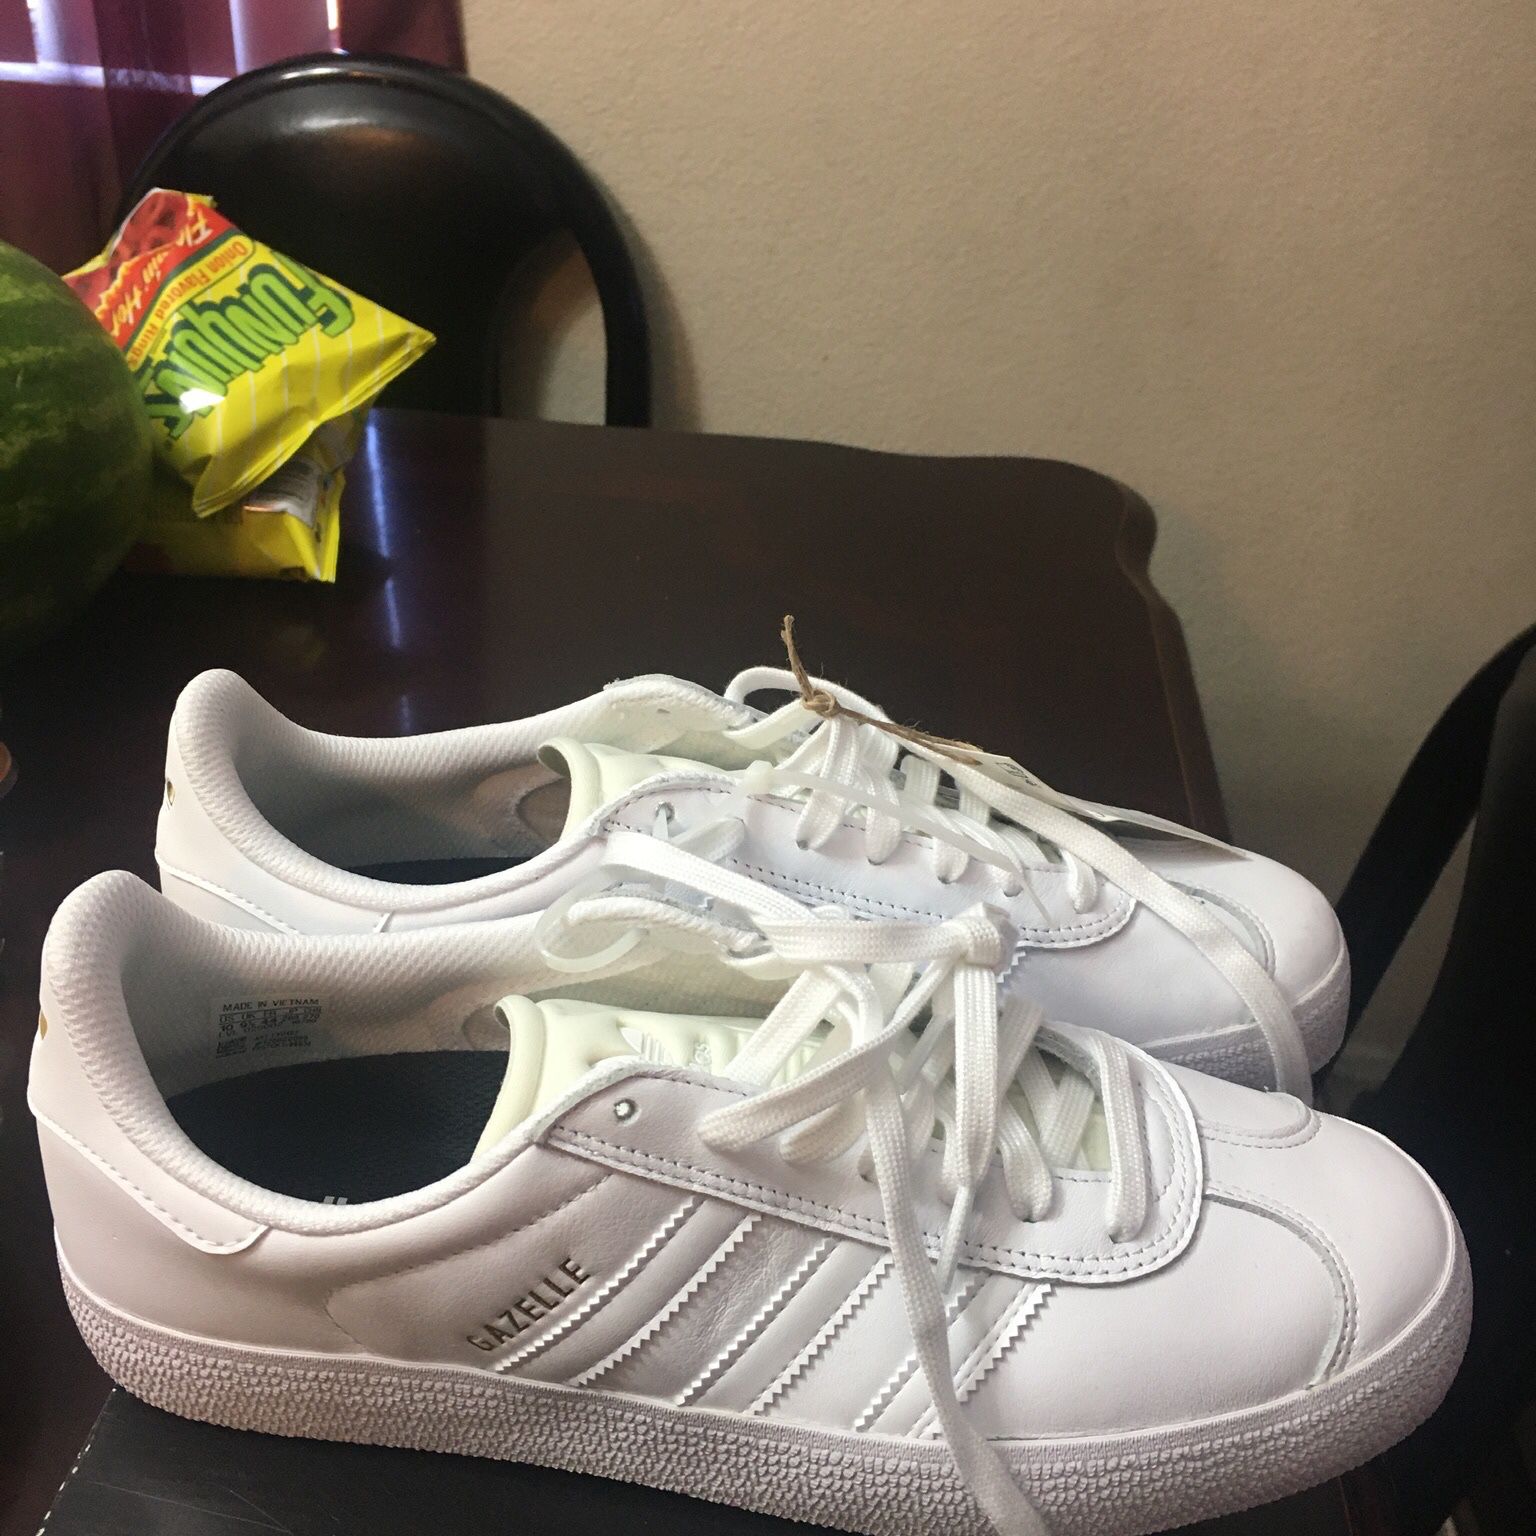 Tenis Nuevos 10 De Hombre Marca Adidas New Never Used for Sale in Irwindale, CA - OfferUp